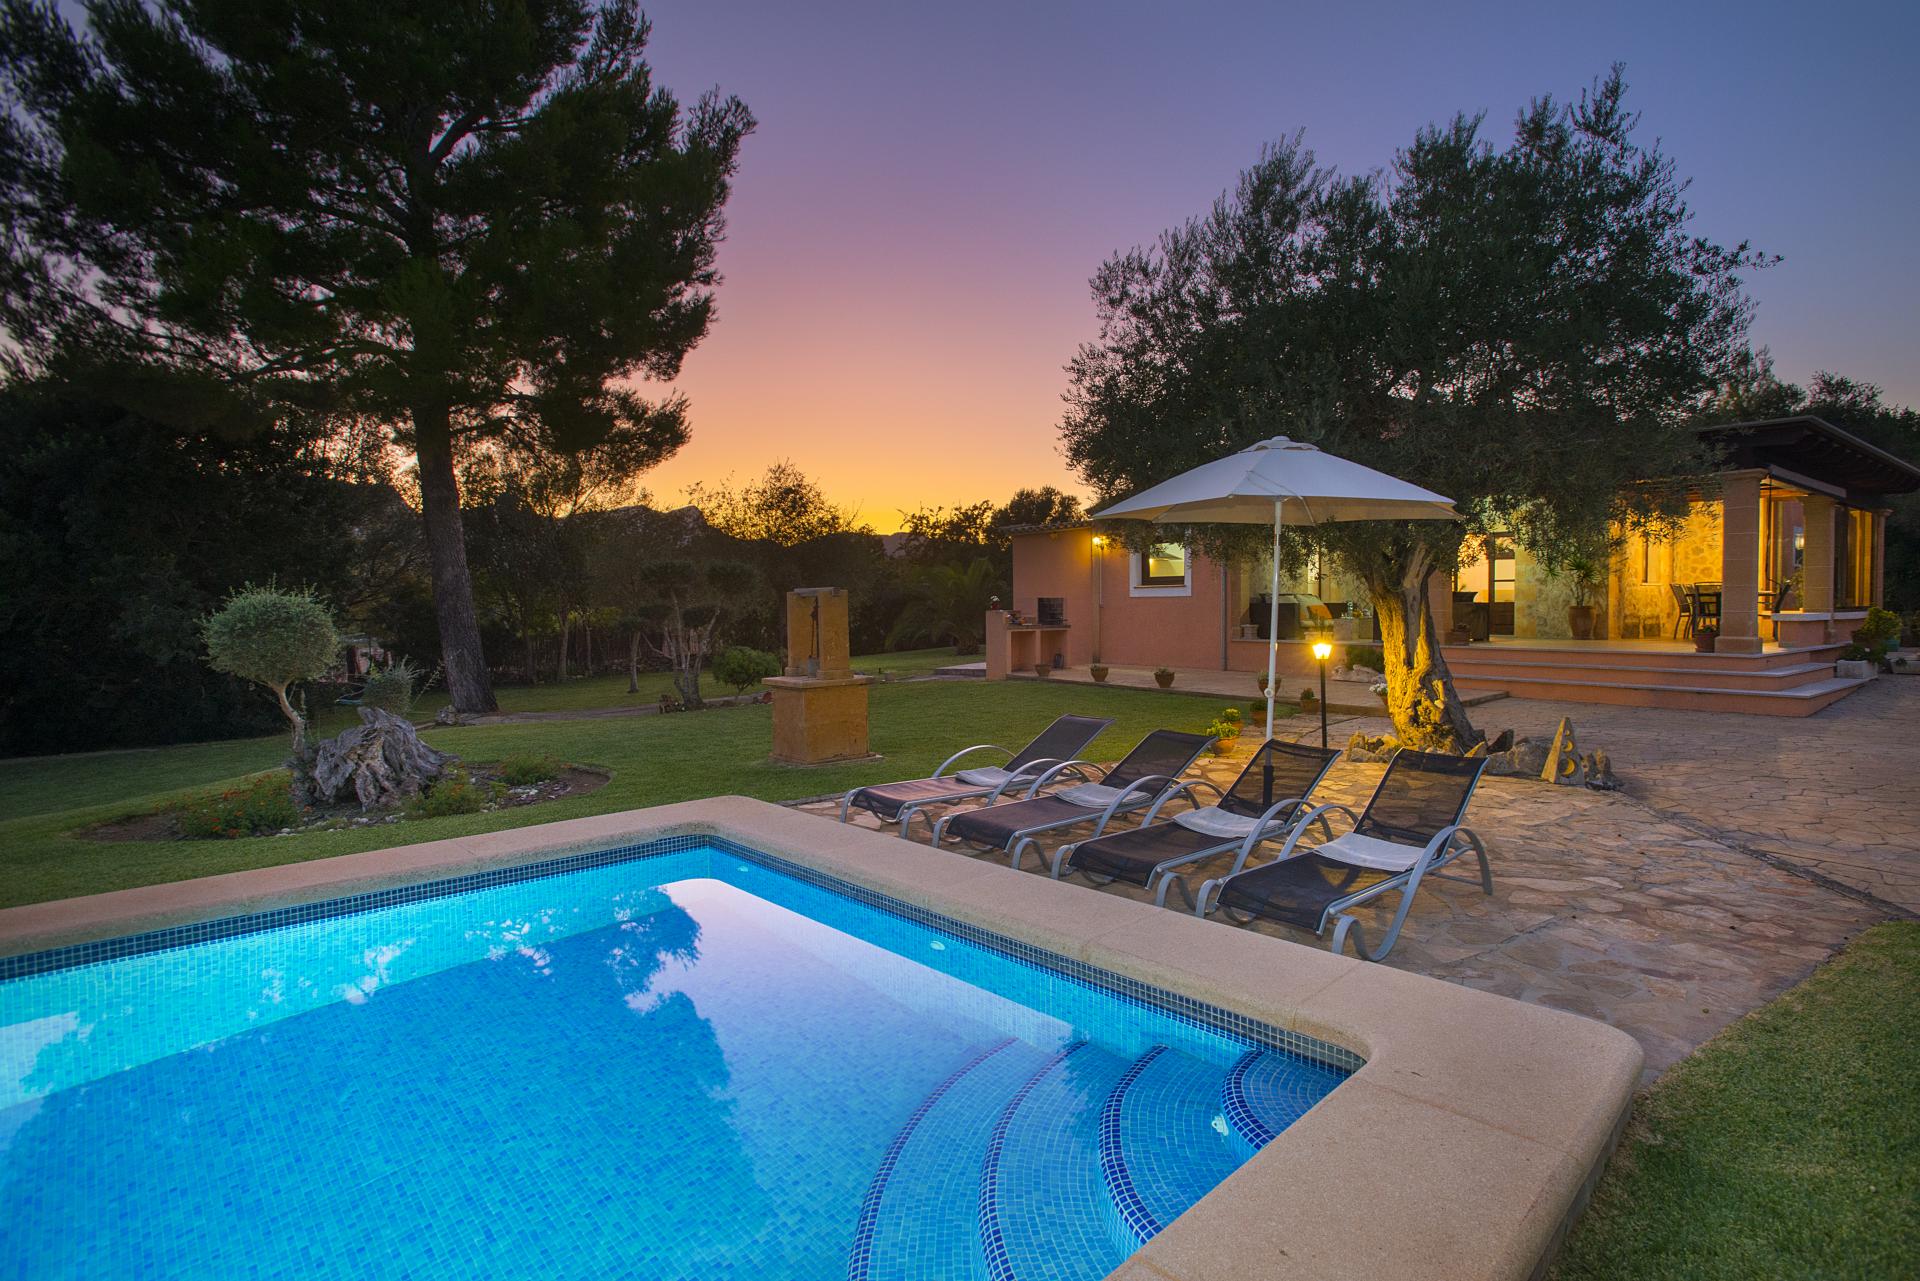 Explore the magical town Pollença while staying in the delightful Villa Rafael